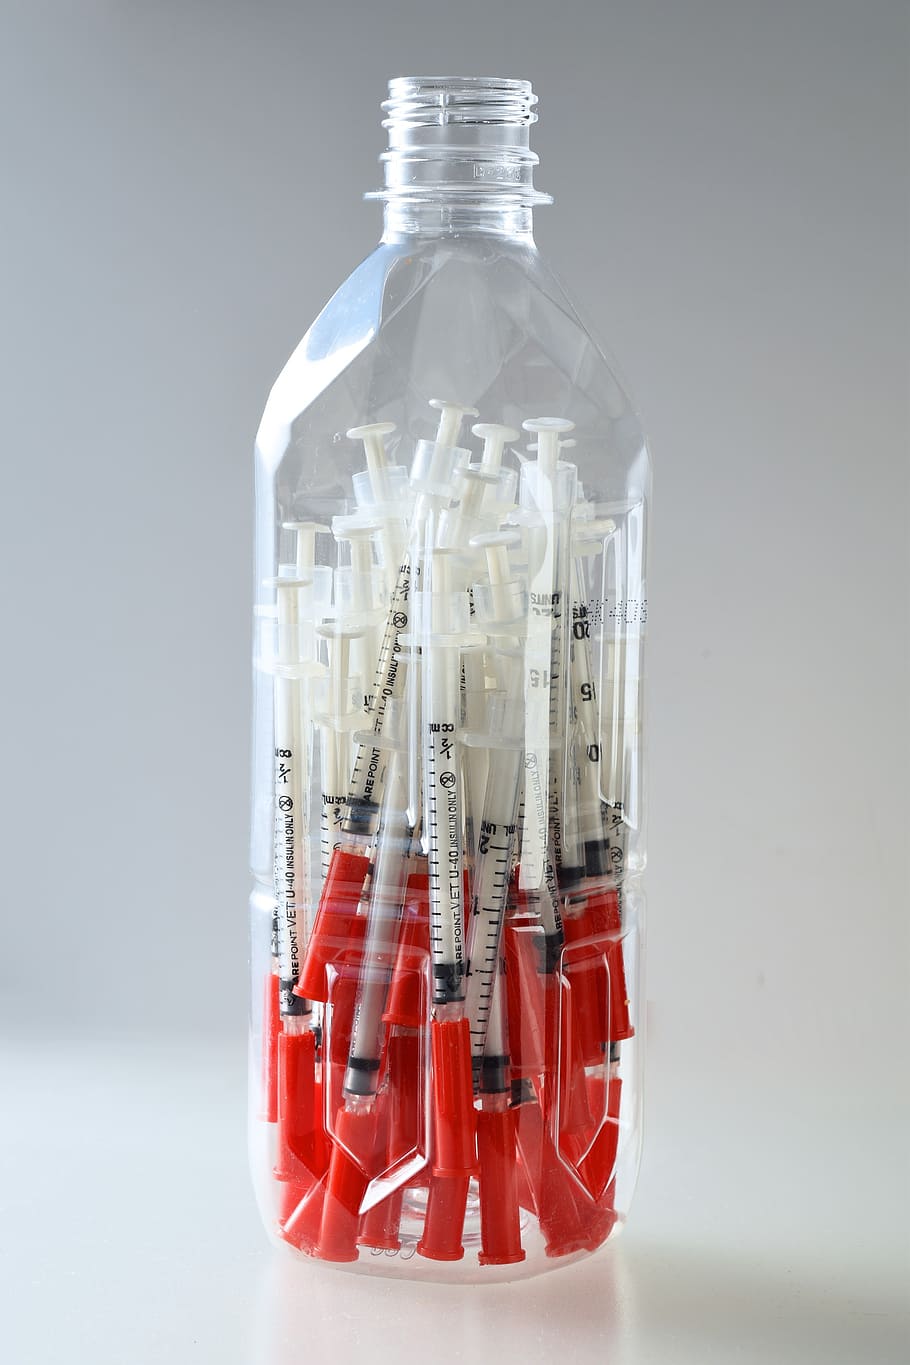 syringe, needle, medicine, injection, vaccination, treatment, health, flu, injecting, surgical